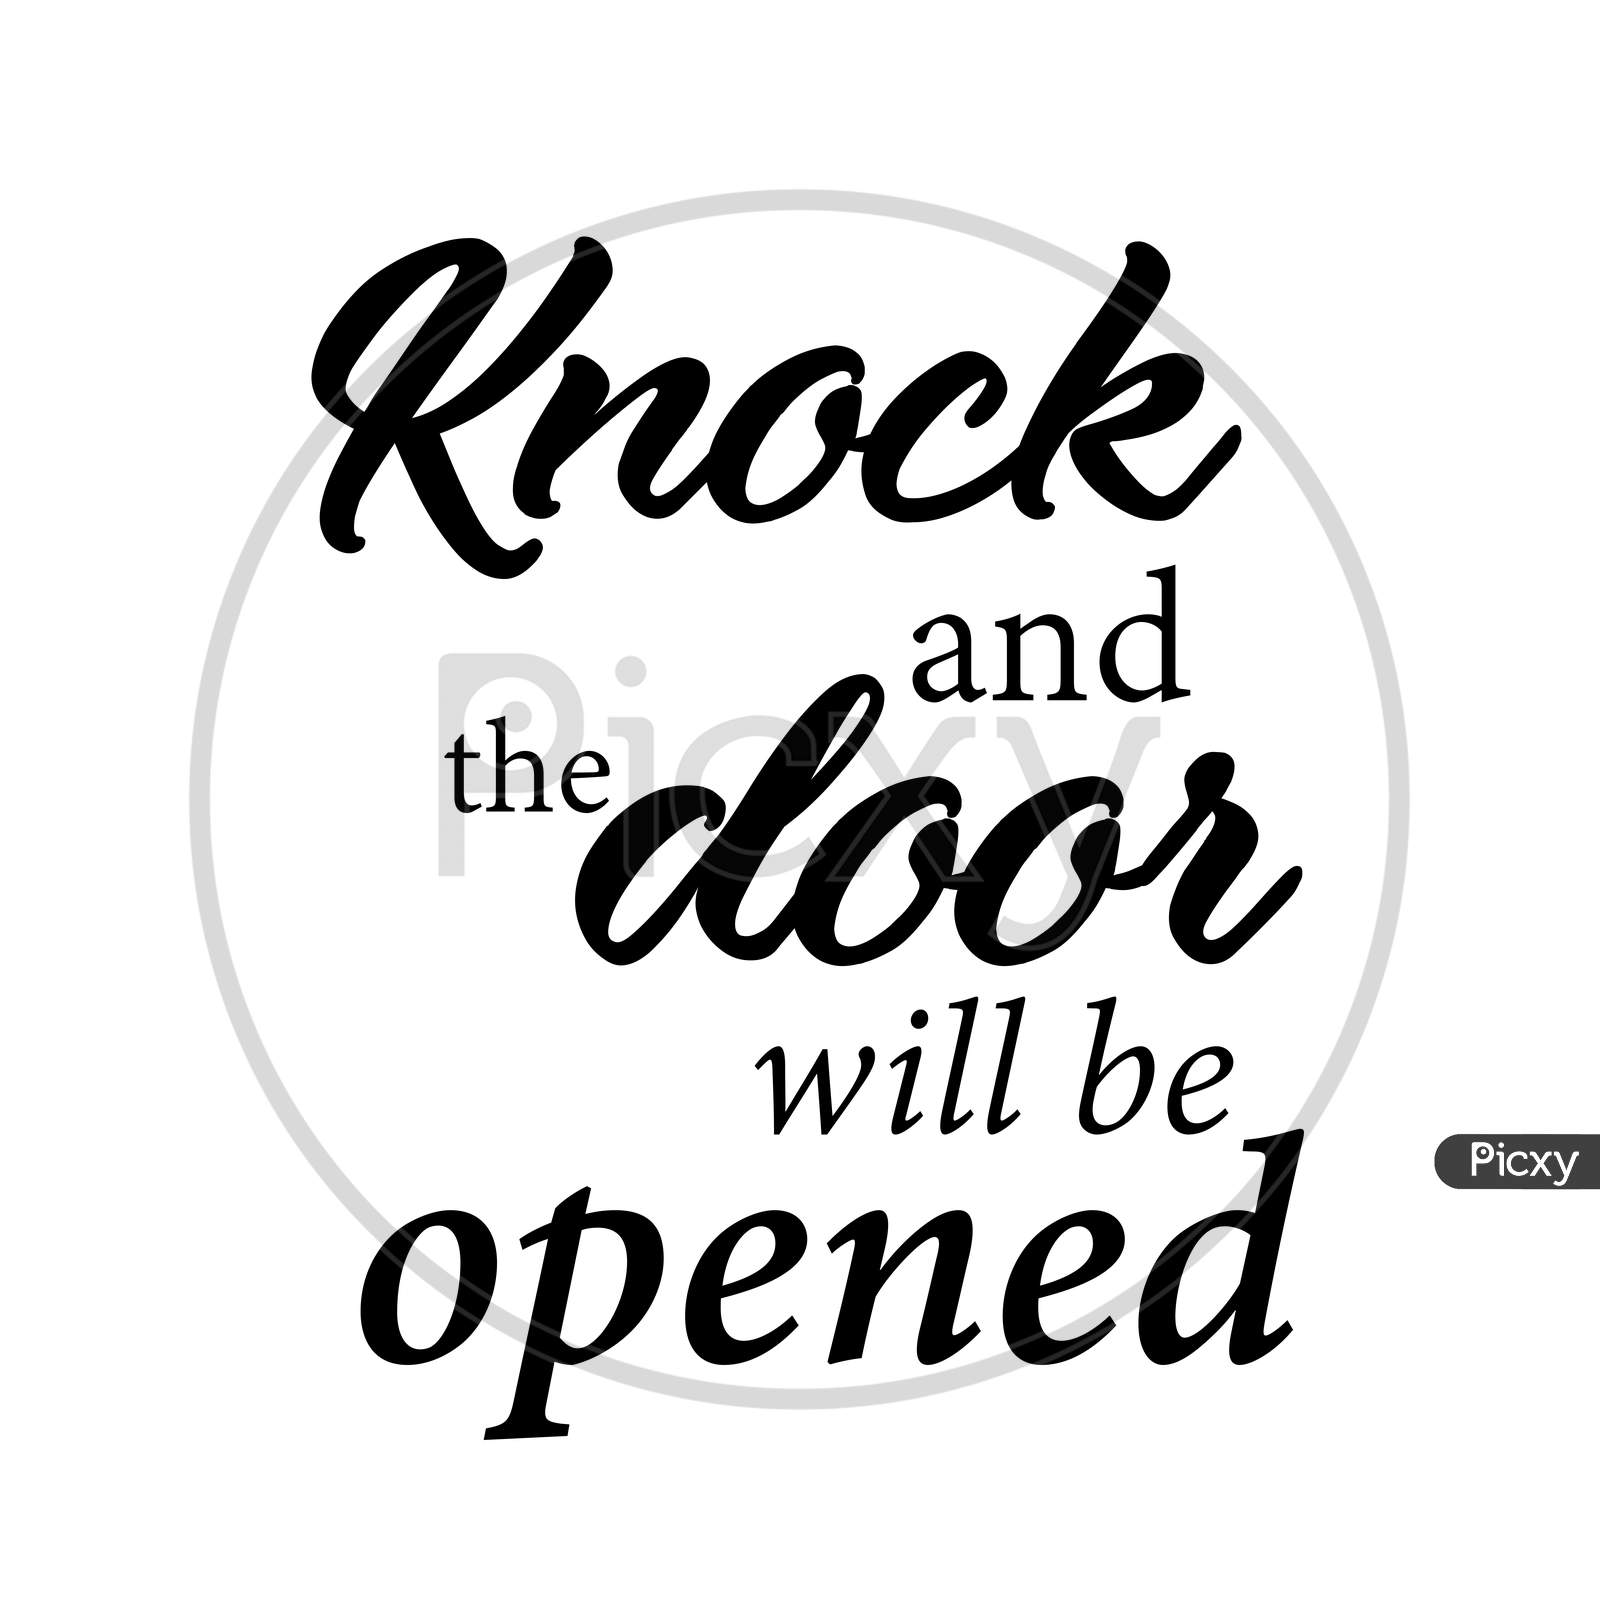 Biblical Phrase - Knock and the door will be opened